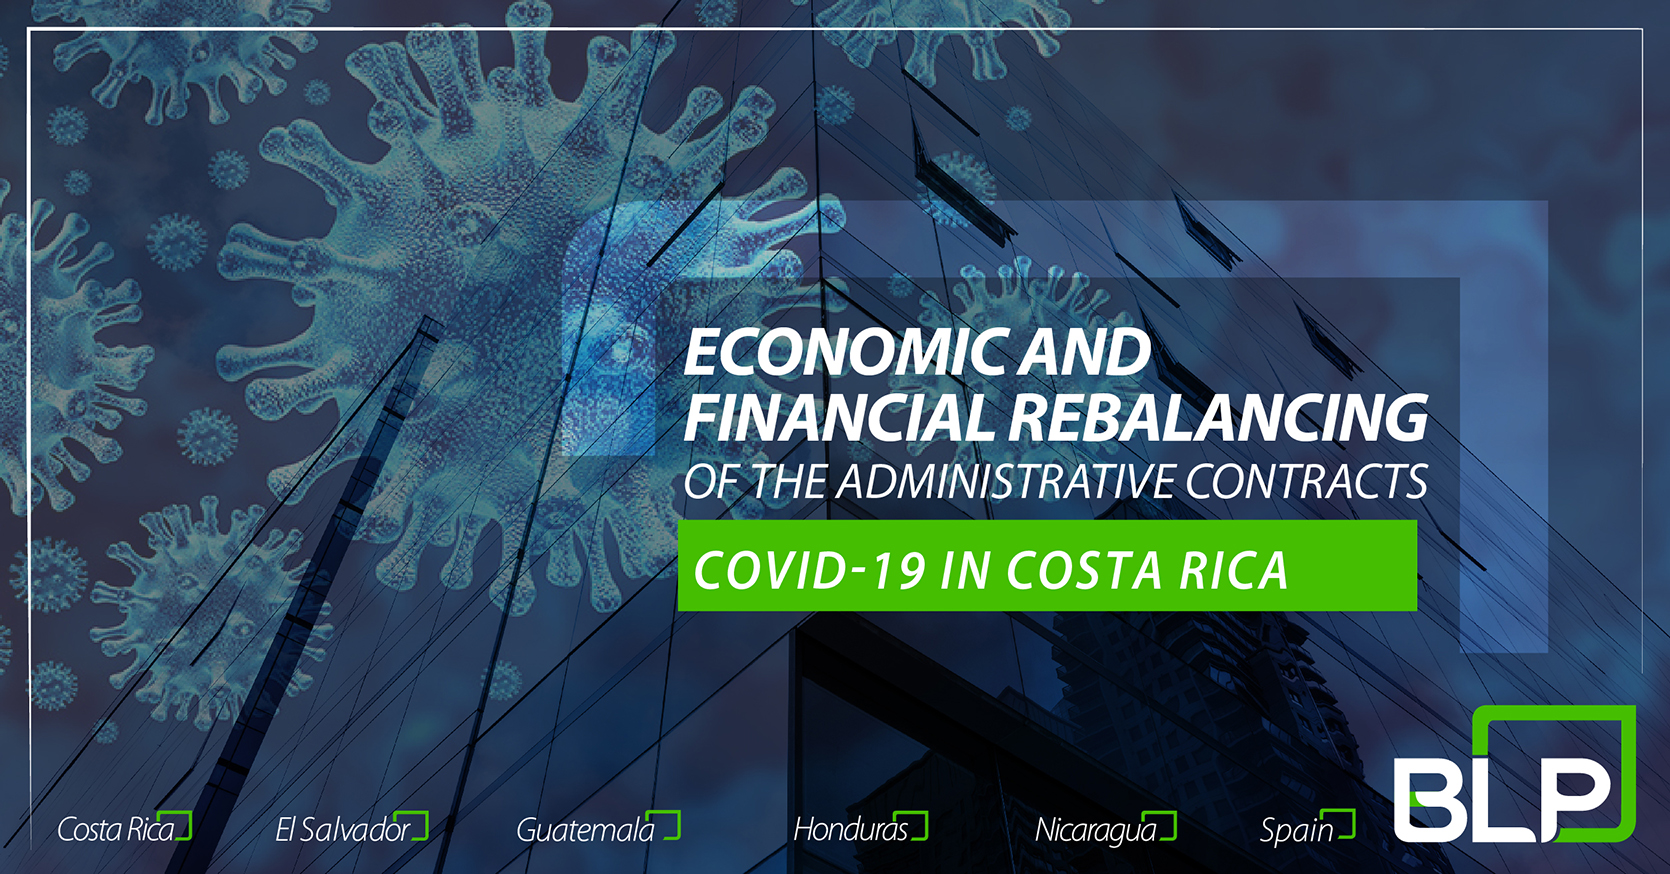 Economic and financial rebalancing on administrative contracts as a consequence of the COVID-19 pandemic.